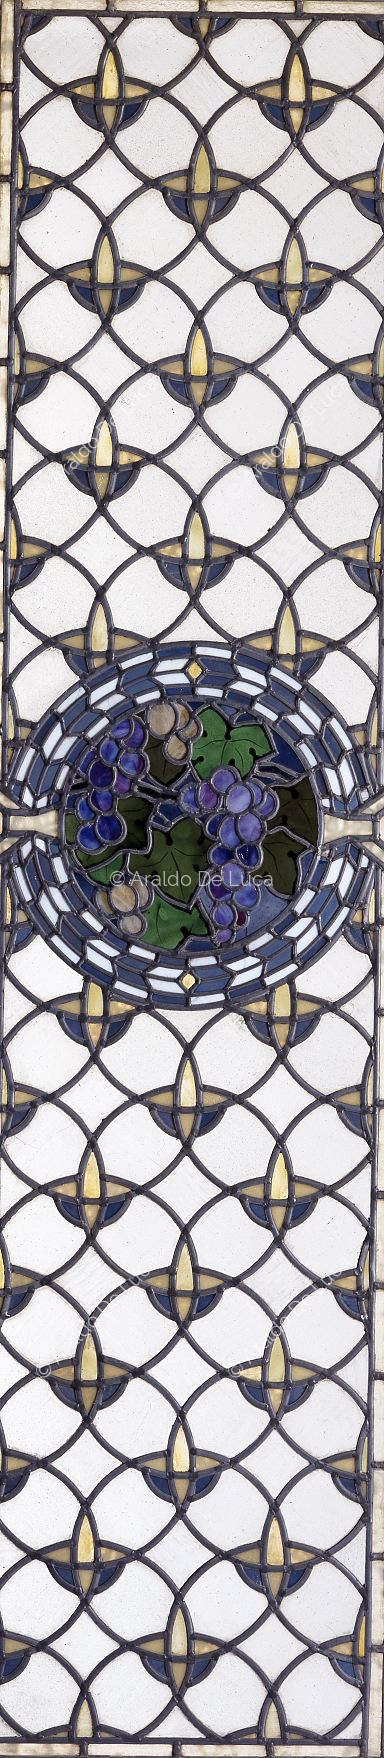 Stained glass with geometric motif and fruit